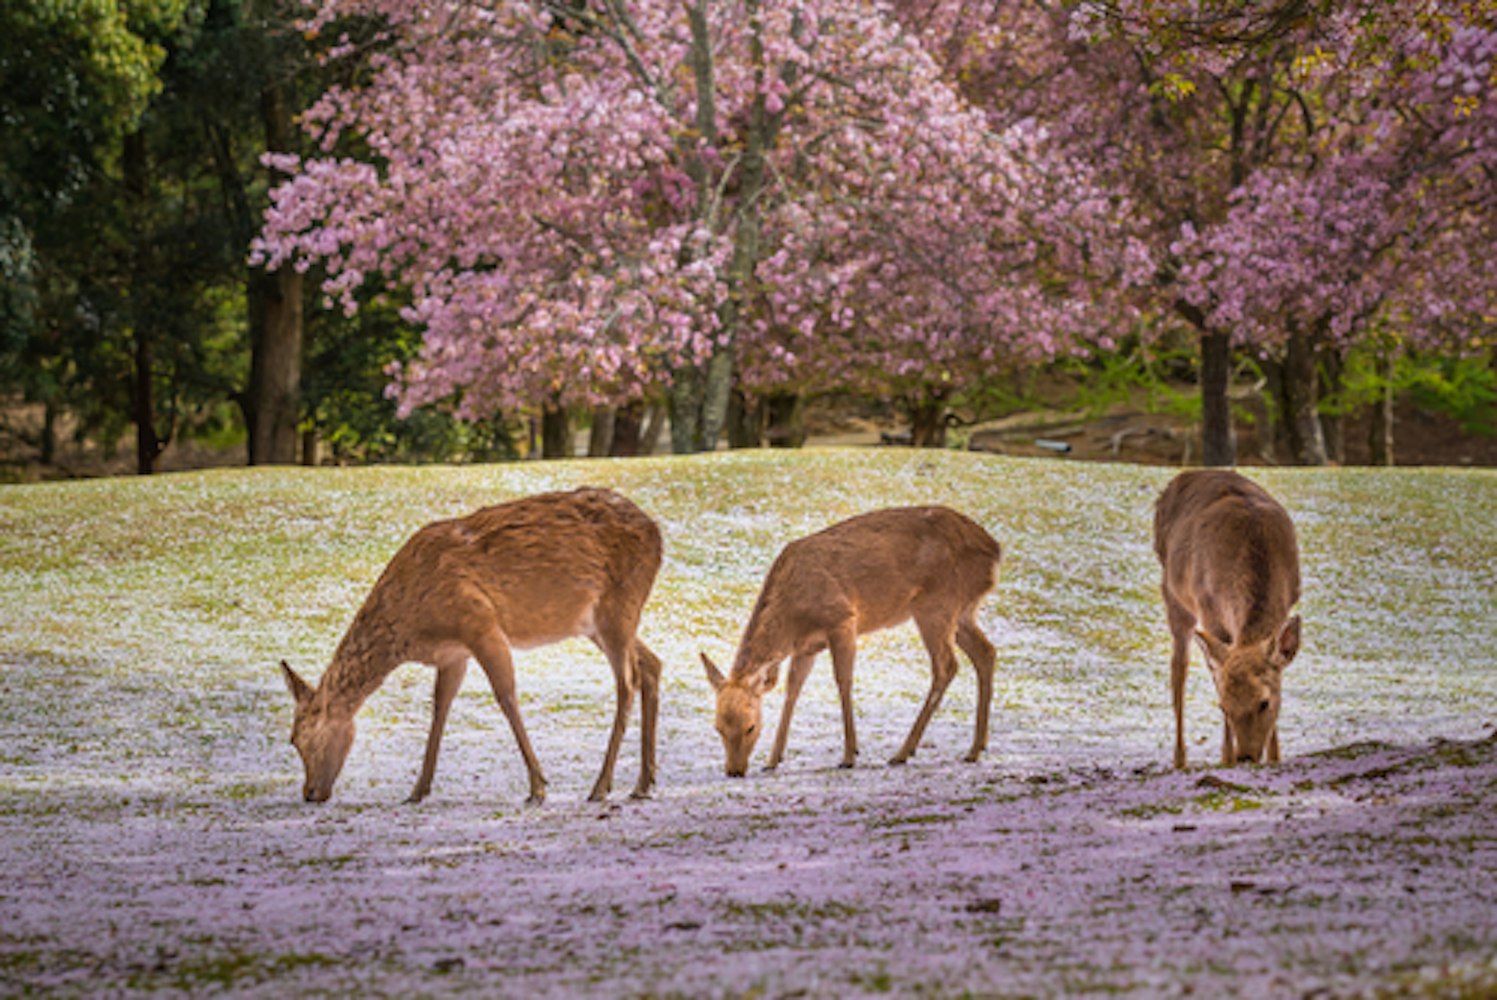 Deers at Nara park during a sunny day in the cherry blossom season